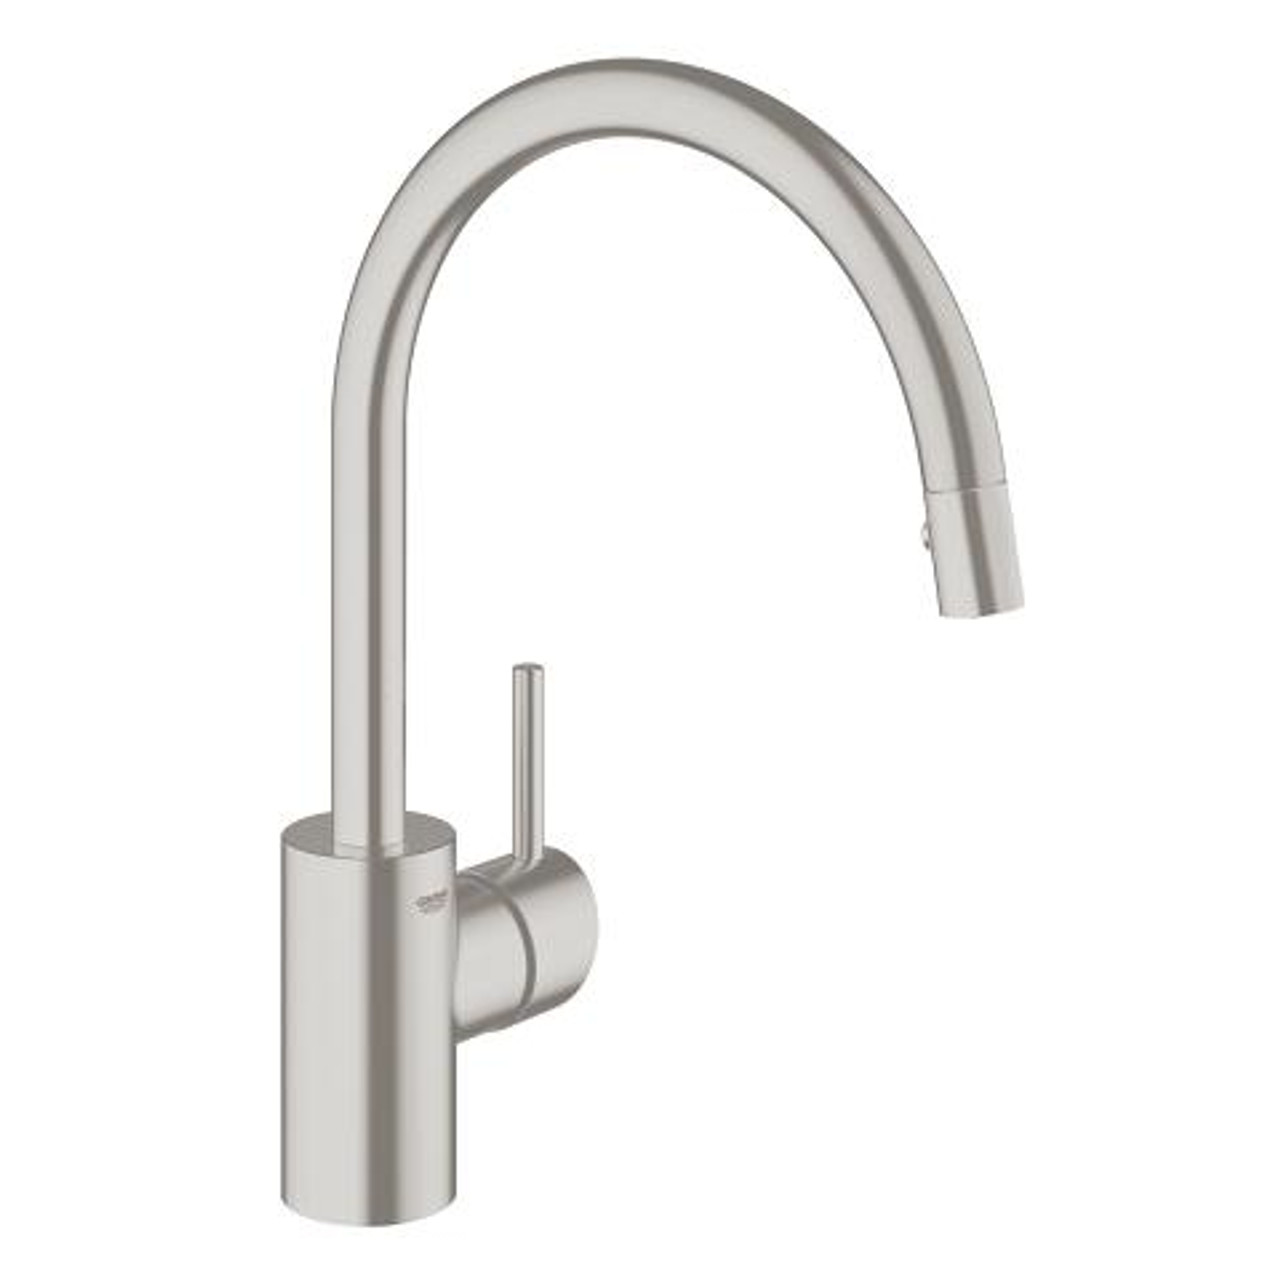 Grohe Concetto Single Handle Kitchen Faucet Dual Spray Pull Down